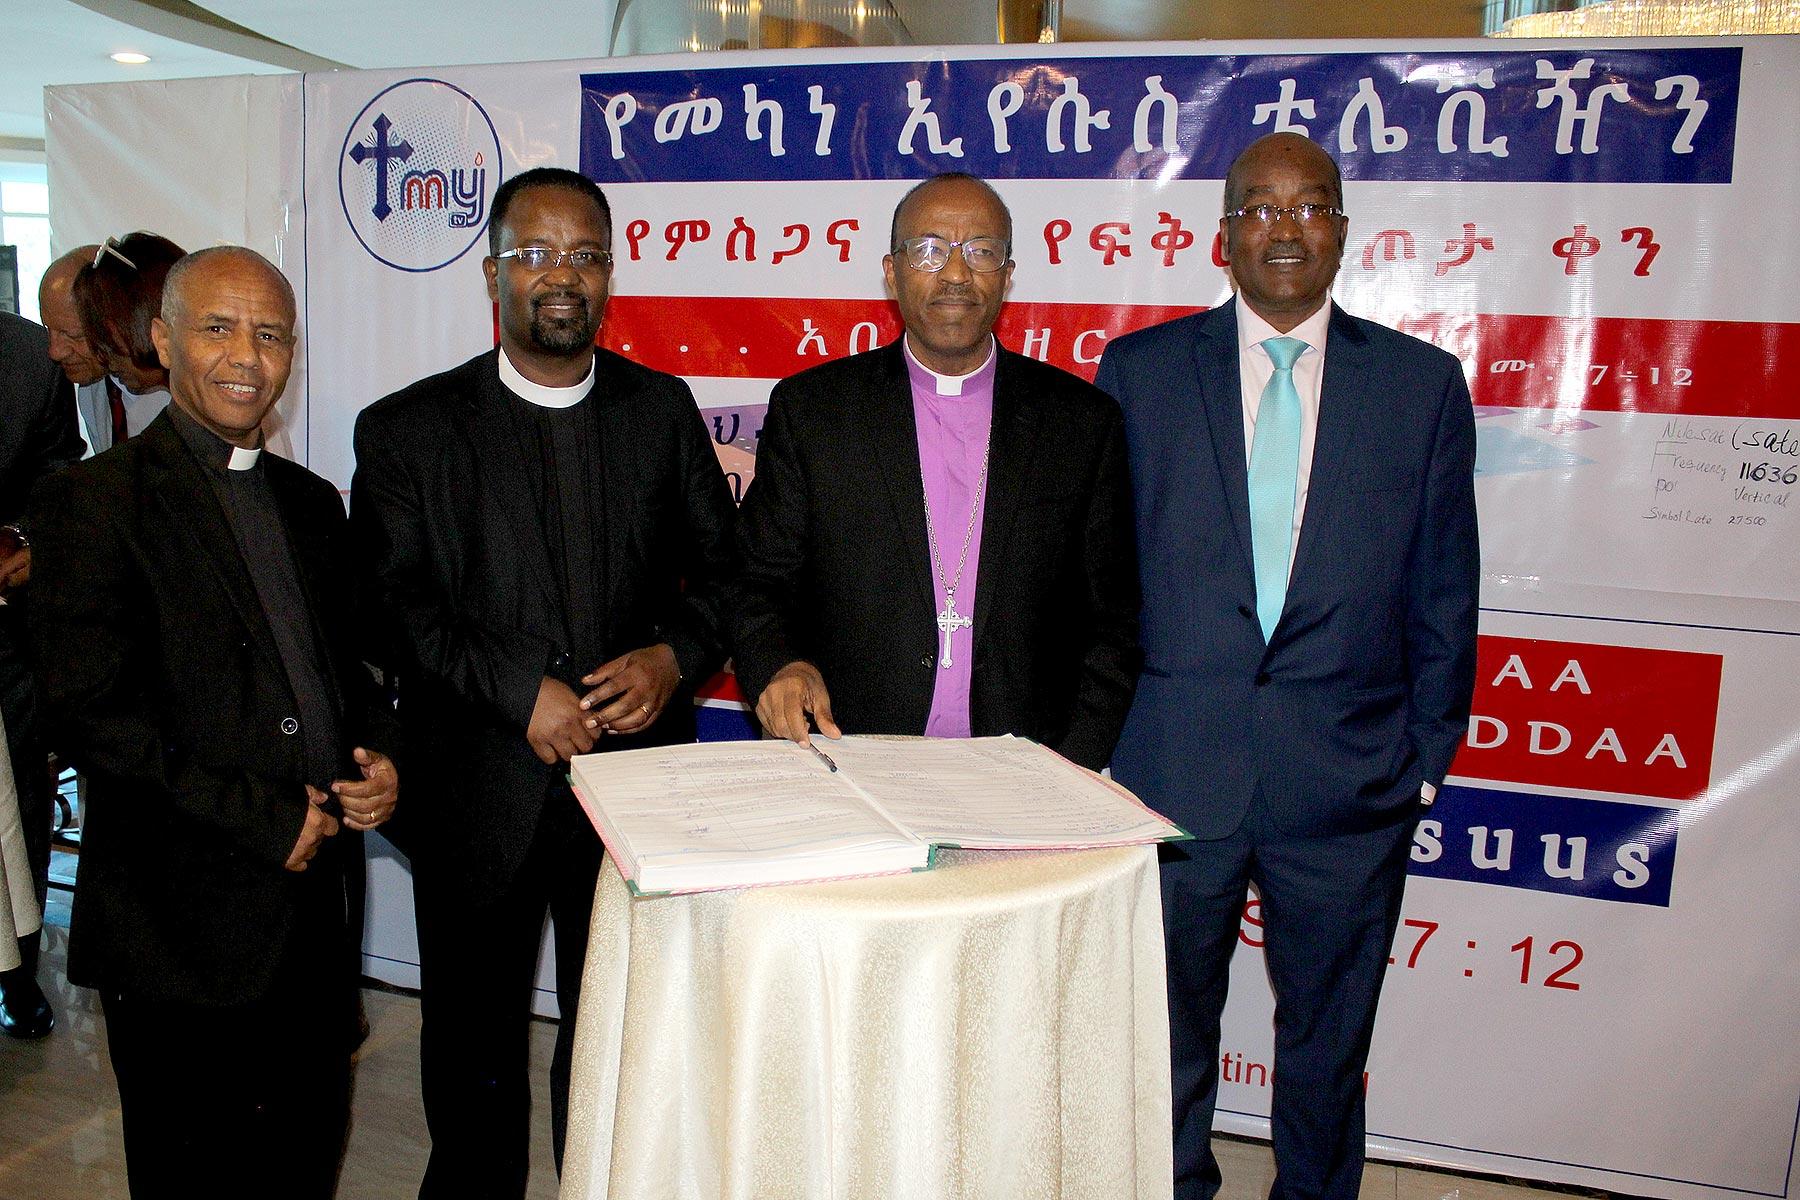 The Ethiopian Evangelical Church Mekane Yesus leaders during the inauguration of MY TV in Addis Ababa; from left, Rev. Dr Kiros Lakew (Vice-President), Rev. Teshome Amenu (General Secretary), Rev. Yonas Yigezu (President) and Mr Girma Borishe (Commissioner, Development and Social Services Commission). Photo: EECMY/Ruth Osmundsen 